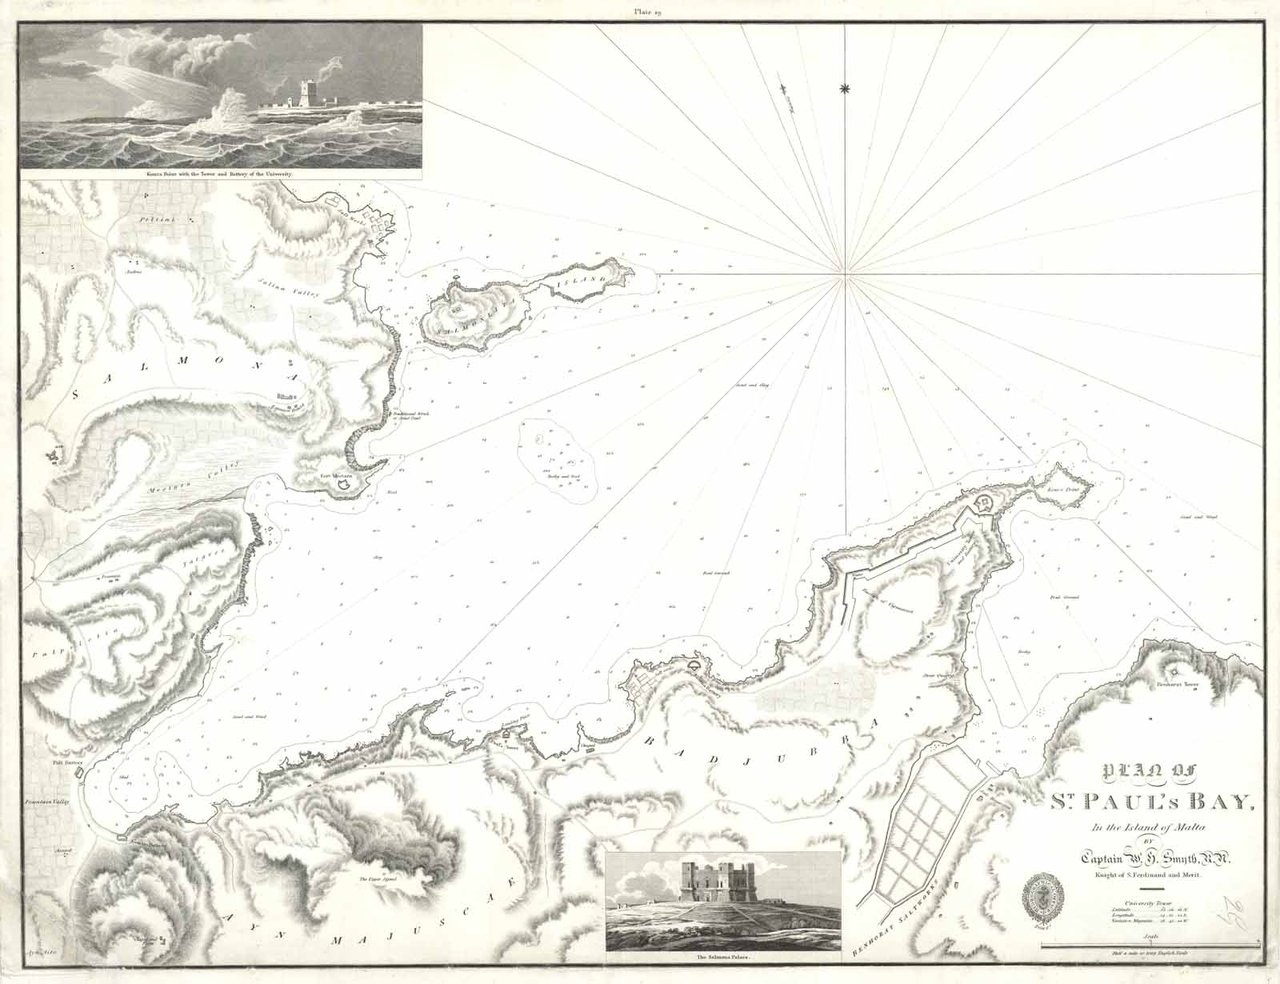 Plan of St. Paul's Bay In the Island of Malta